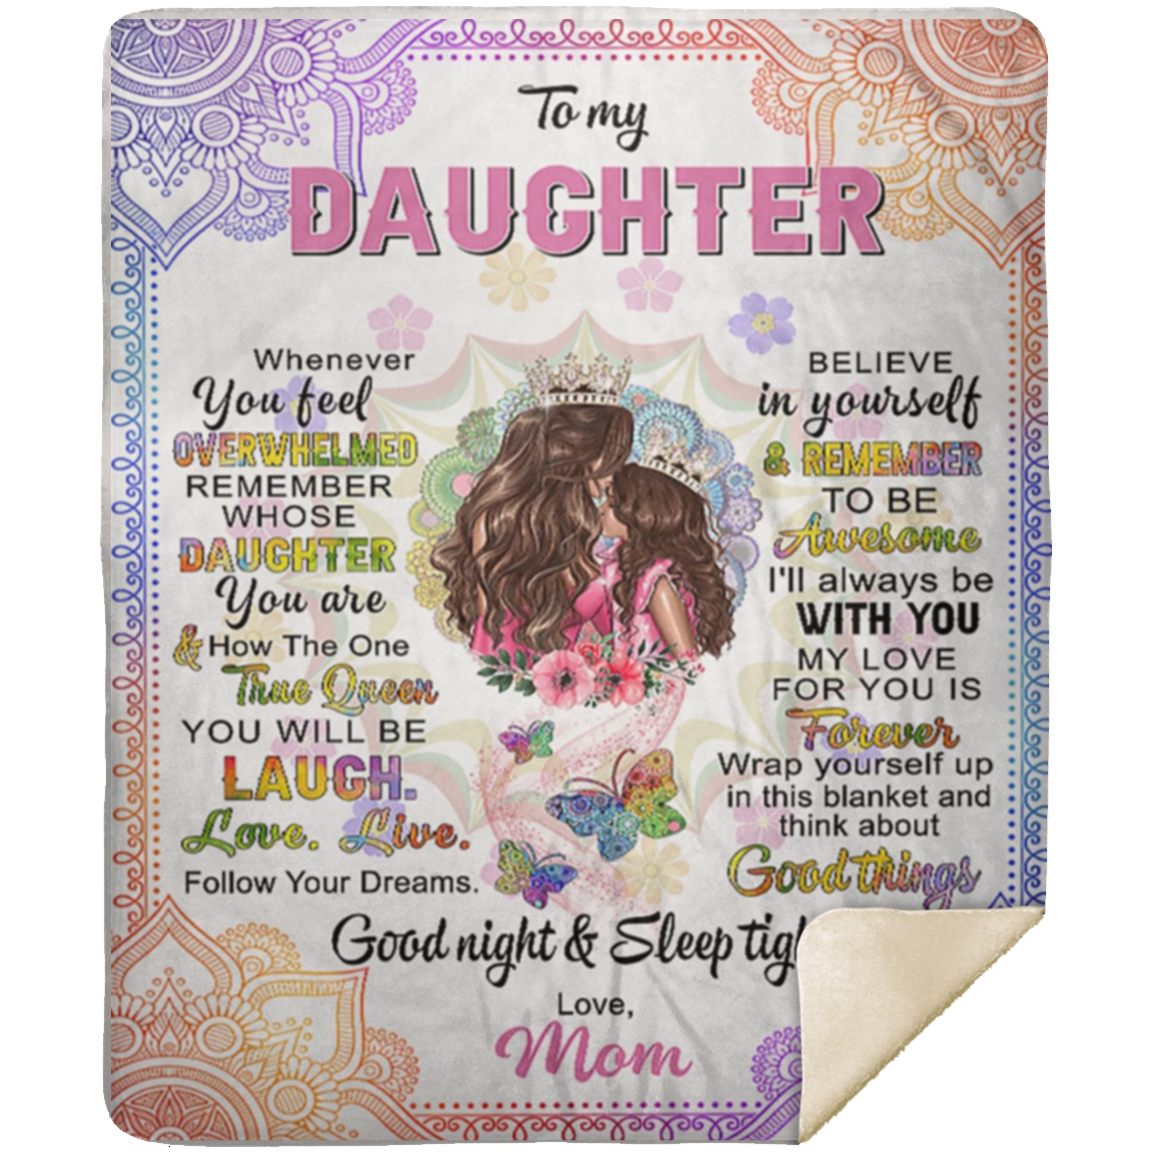 To My Daughter - Whenever You Feel Premium Mink Sherpa Blanket